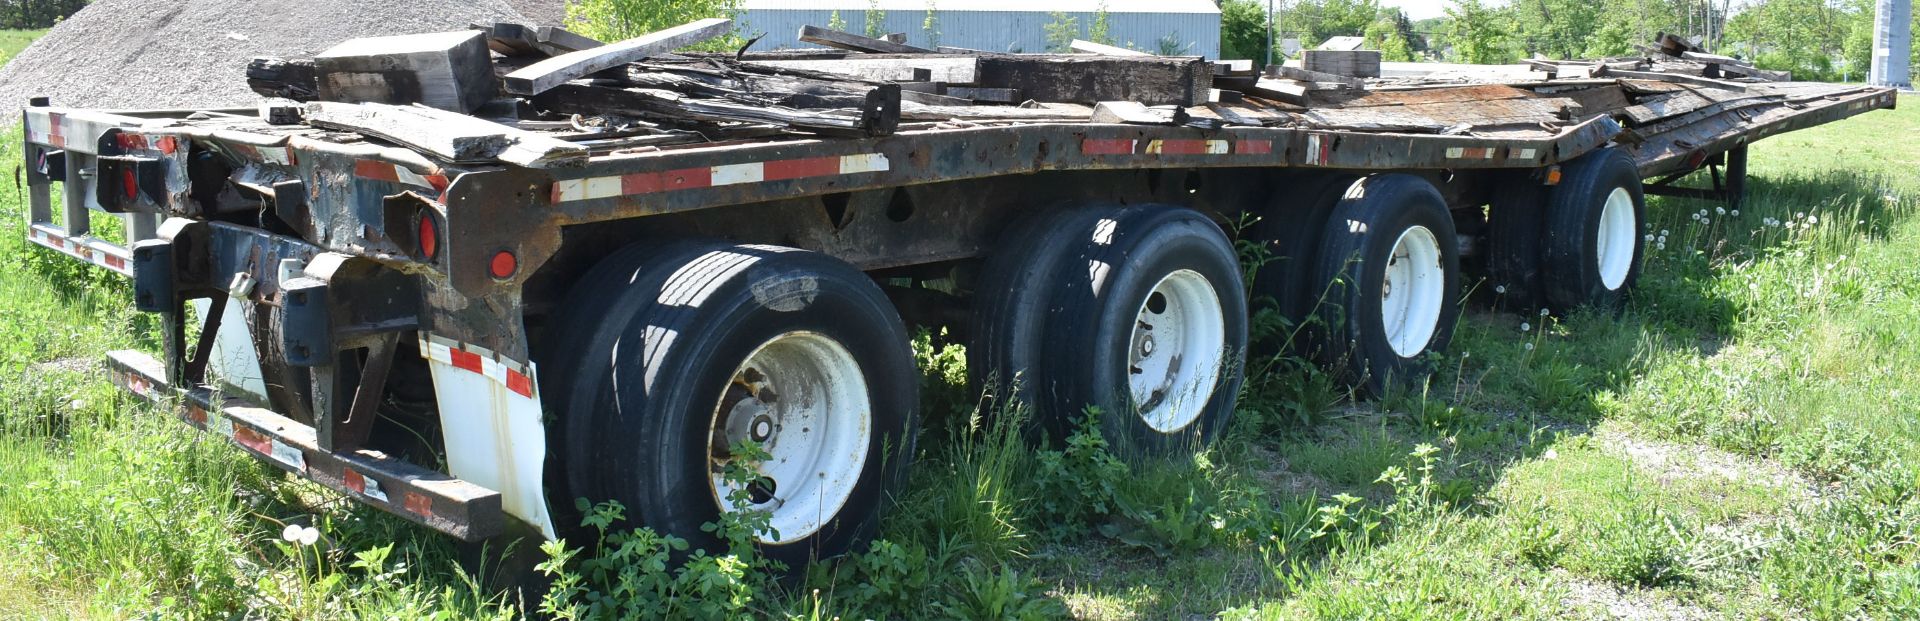 MFG. UNKNOWN 53' TRI-AXLE FLATBED TRAILER, VIN: N/A (NOT PLATED, NO REGISTRATION - PARTS TRAILER) [ - Image 3 of 4